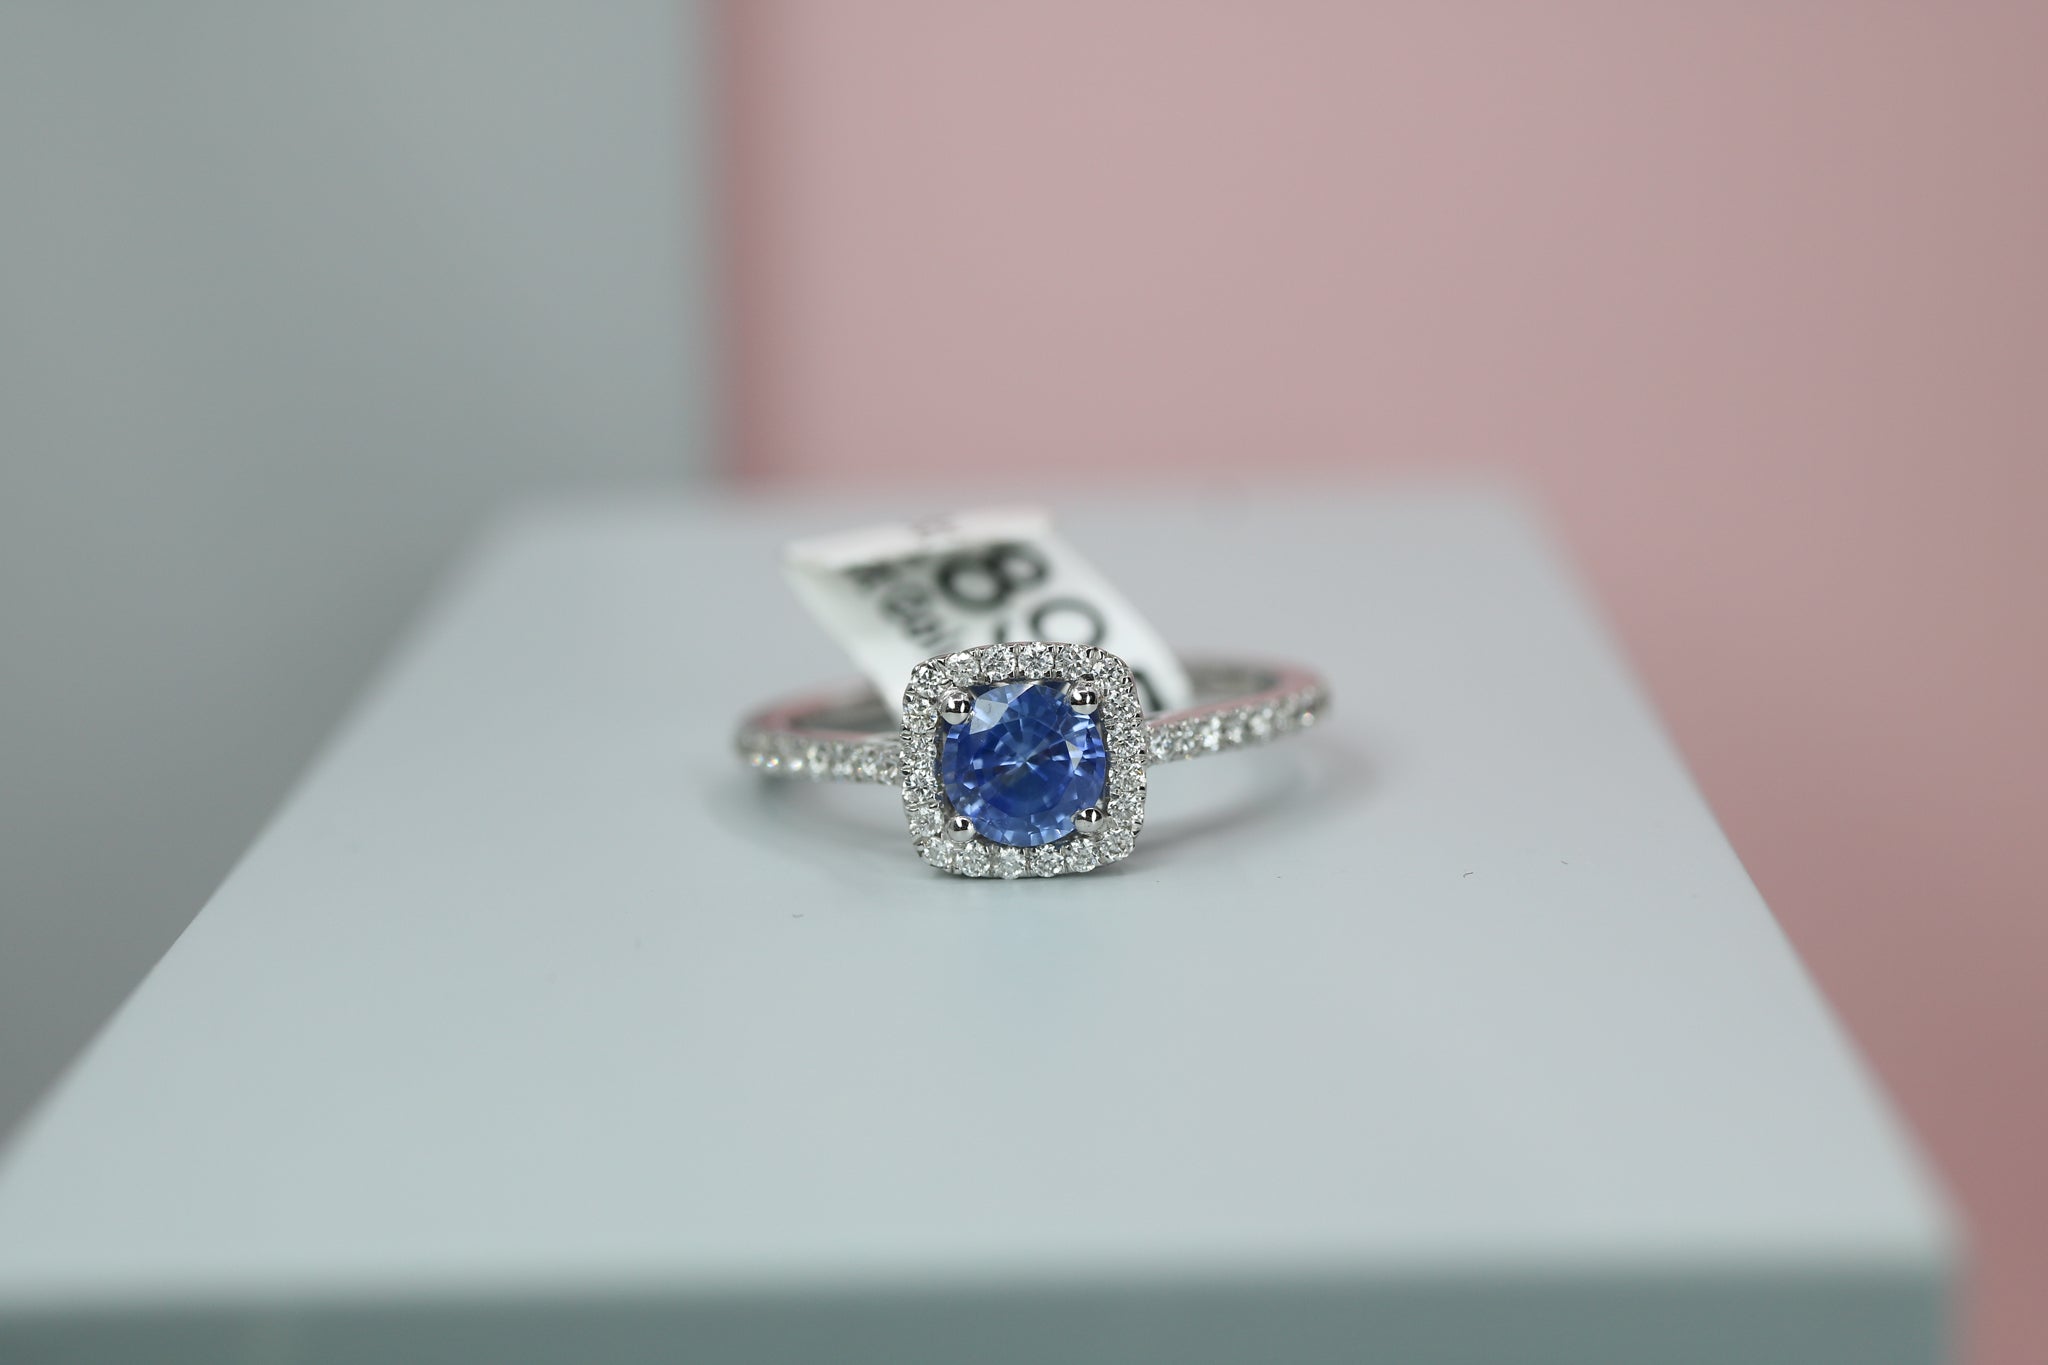 18ct White Gold Sapphire & Diamond Ring - Hallmark Jewellers Formby & The Jewellers Bench Widnes